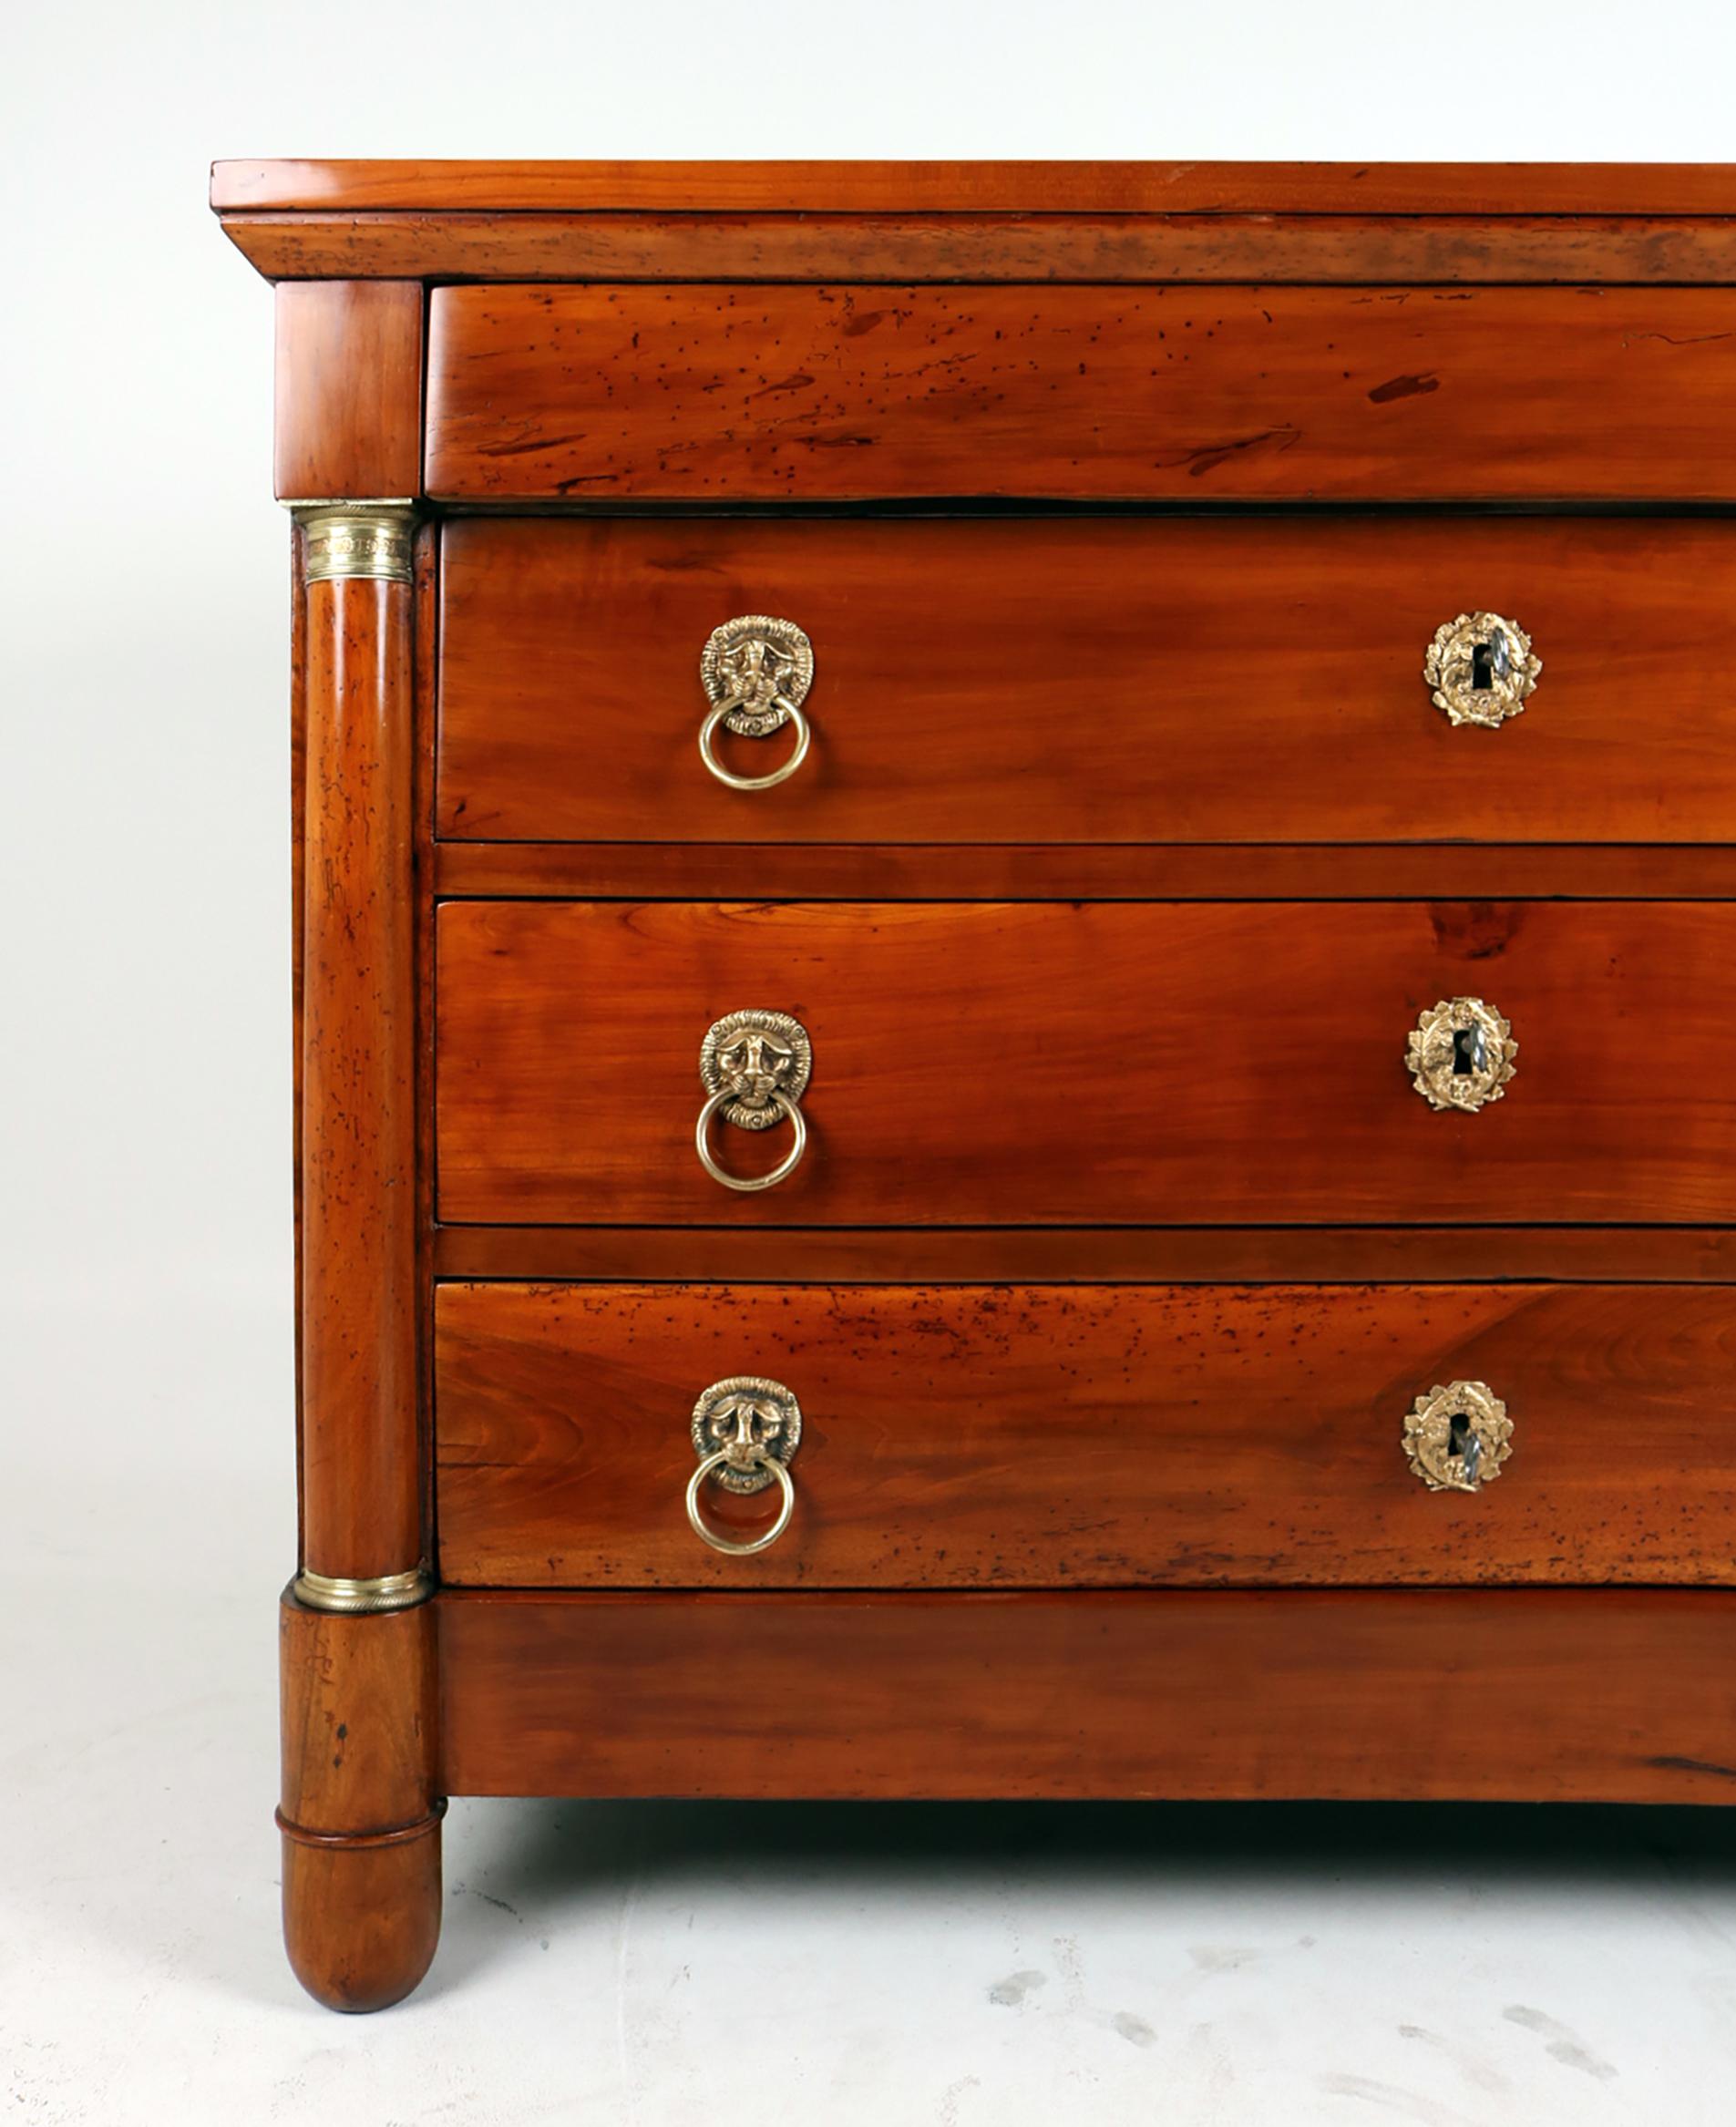 French Early 19th Century Empire Chest of Drawers, Cherrywood, France, C. 1820